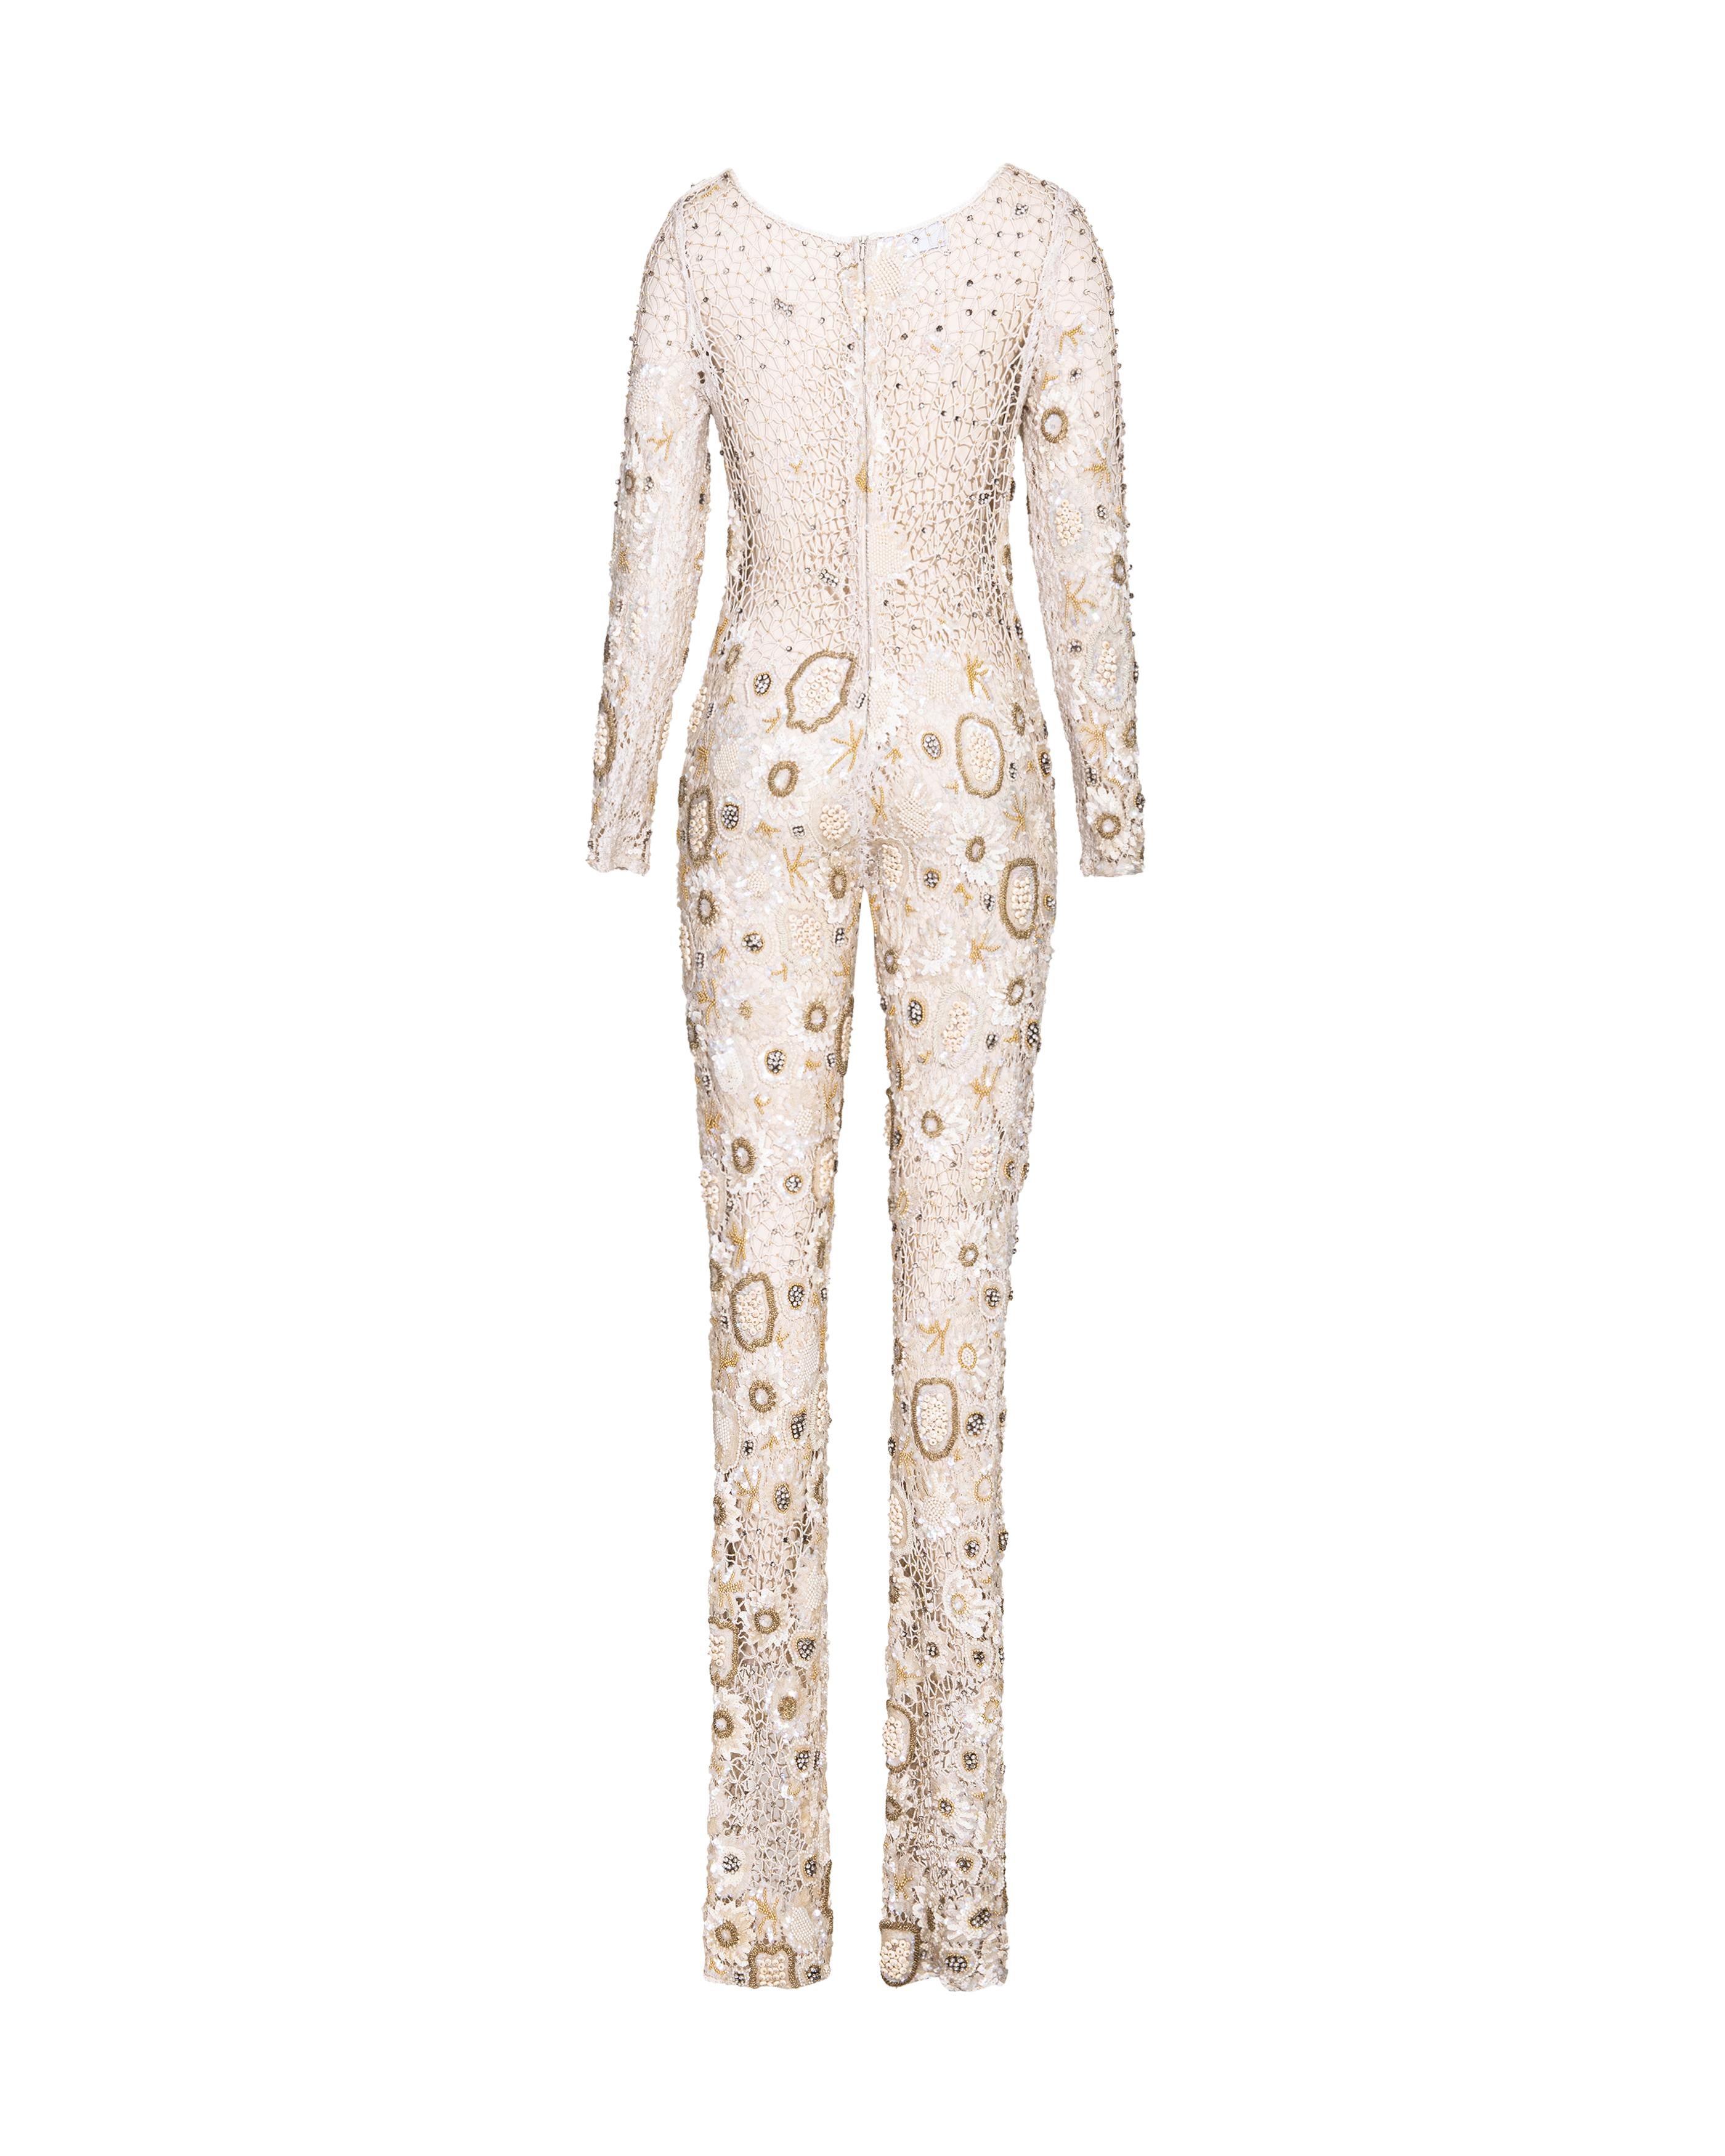 A/W 1994 Louis Feraud Haute Couture Embellished Embroidered Floral Jumpsuit 1